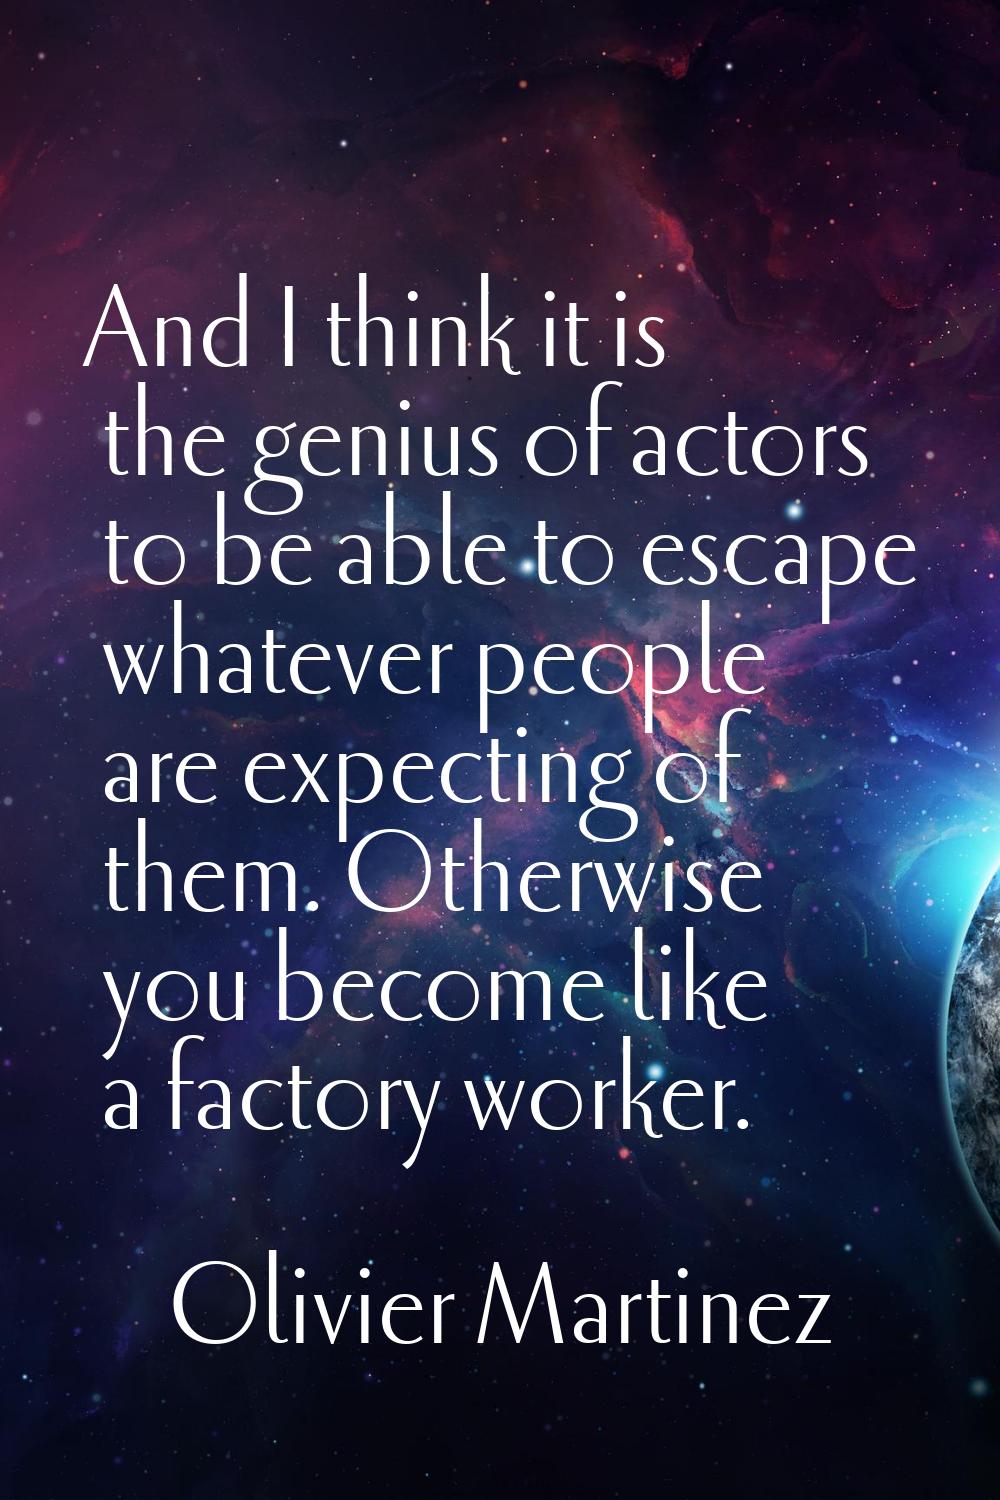 And I think it is the genius of actors to be able to escape whatever people are expecting of them. 